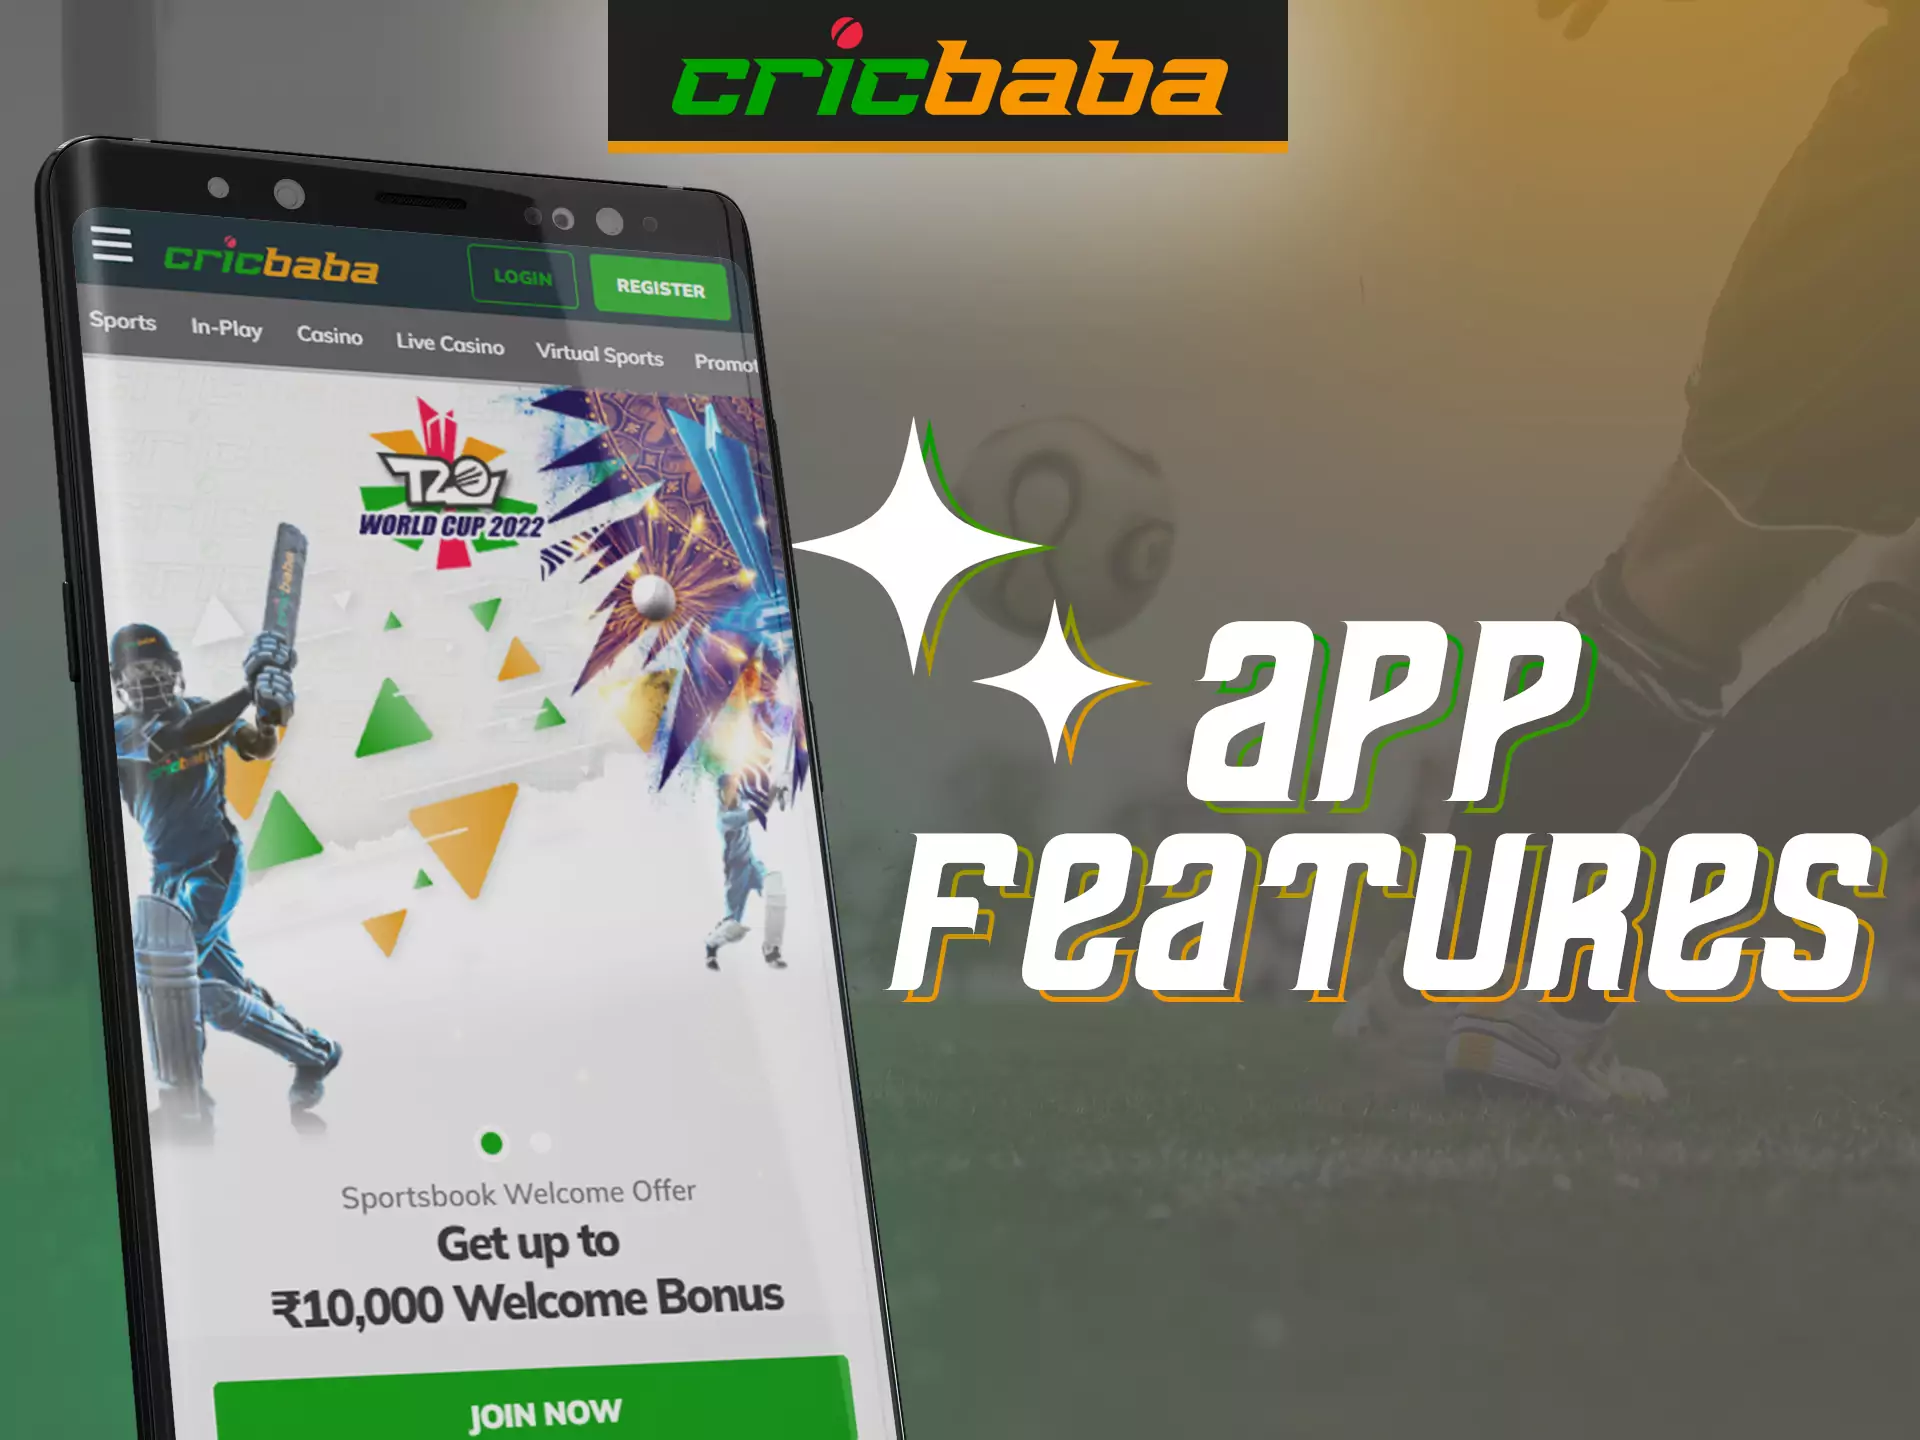 Get acquainted with all the properties and features of Cricbaba.